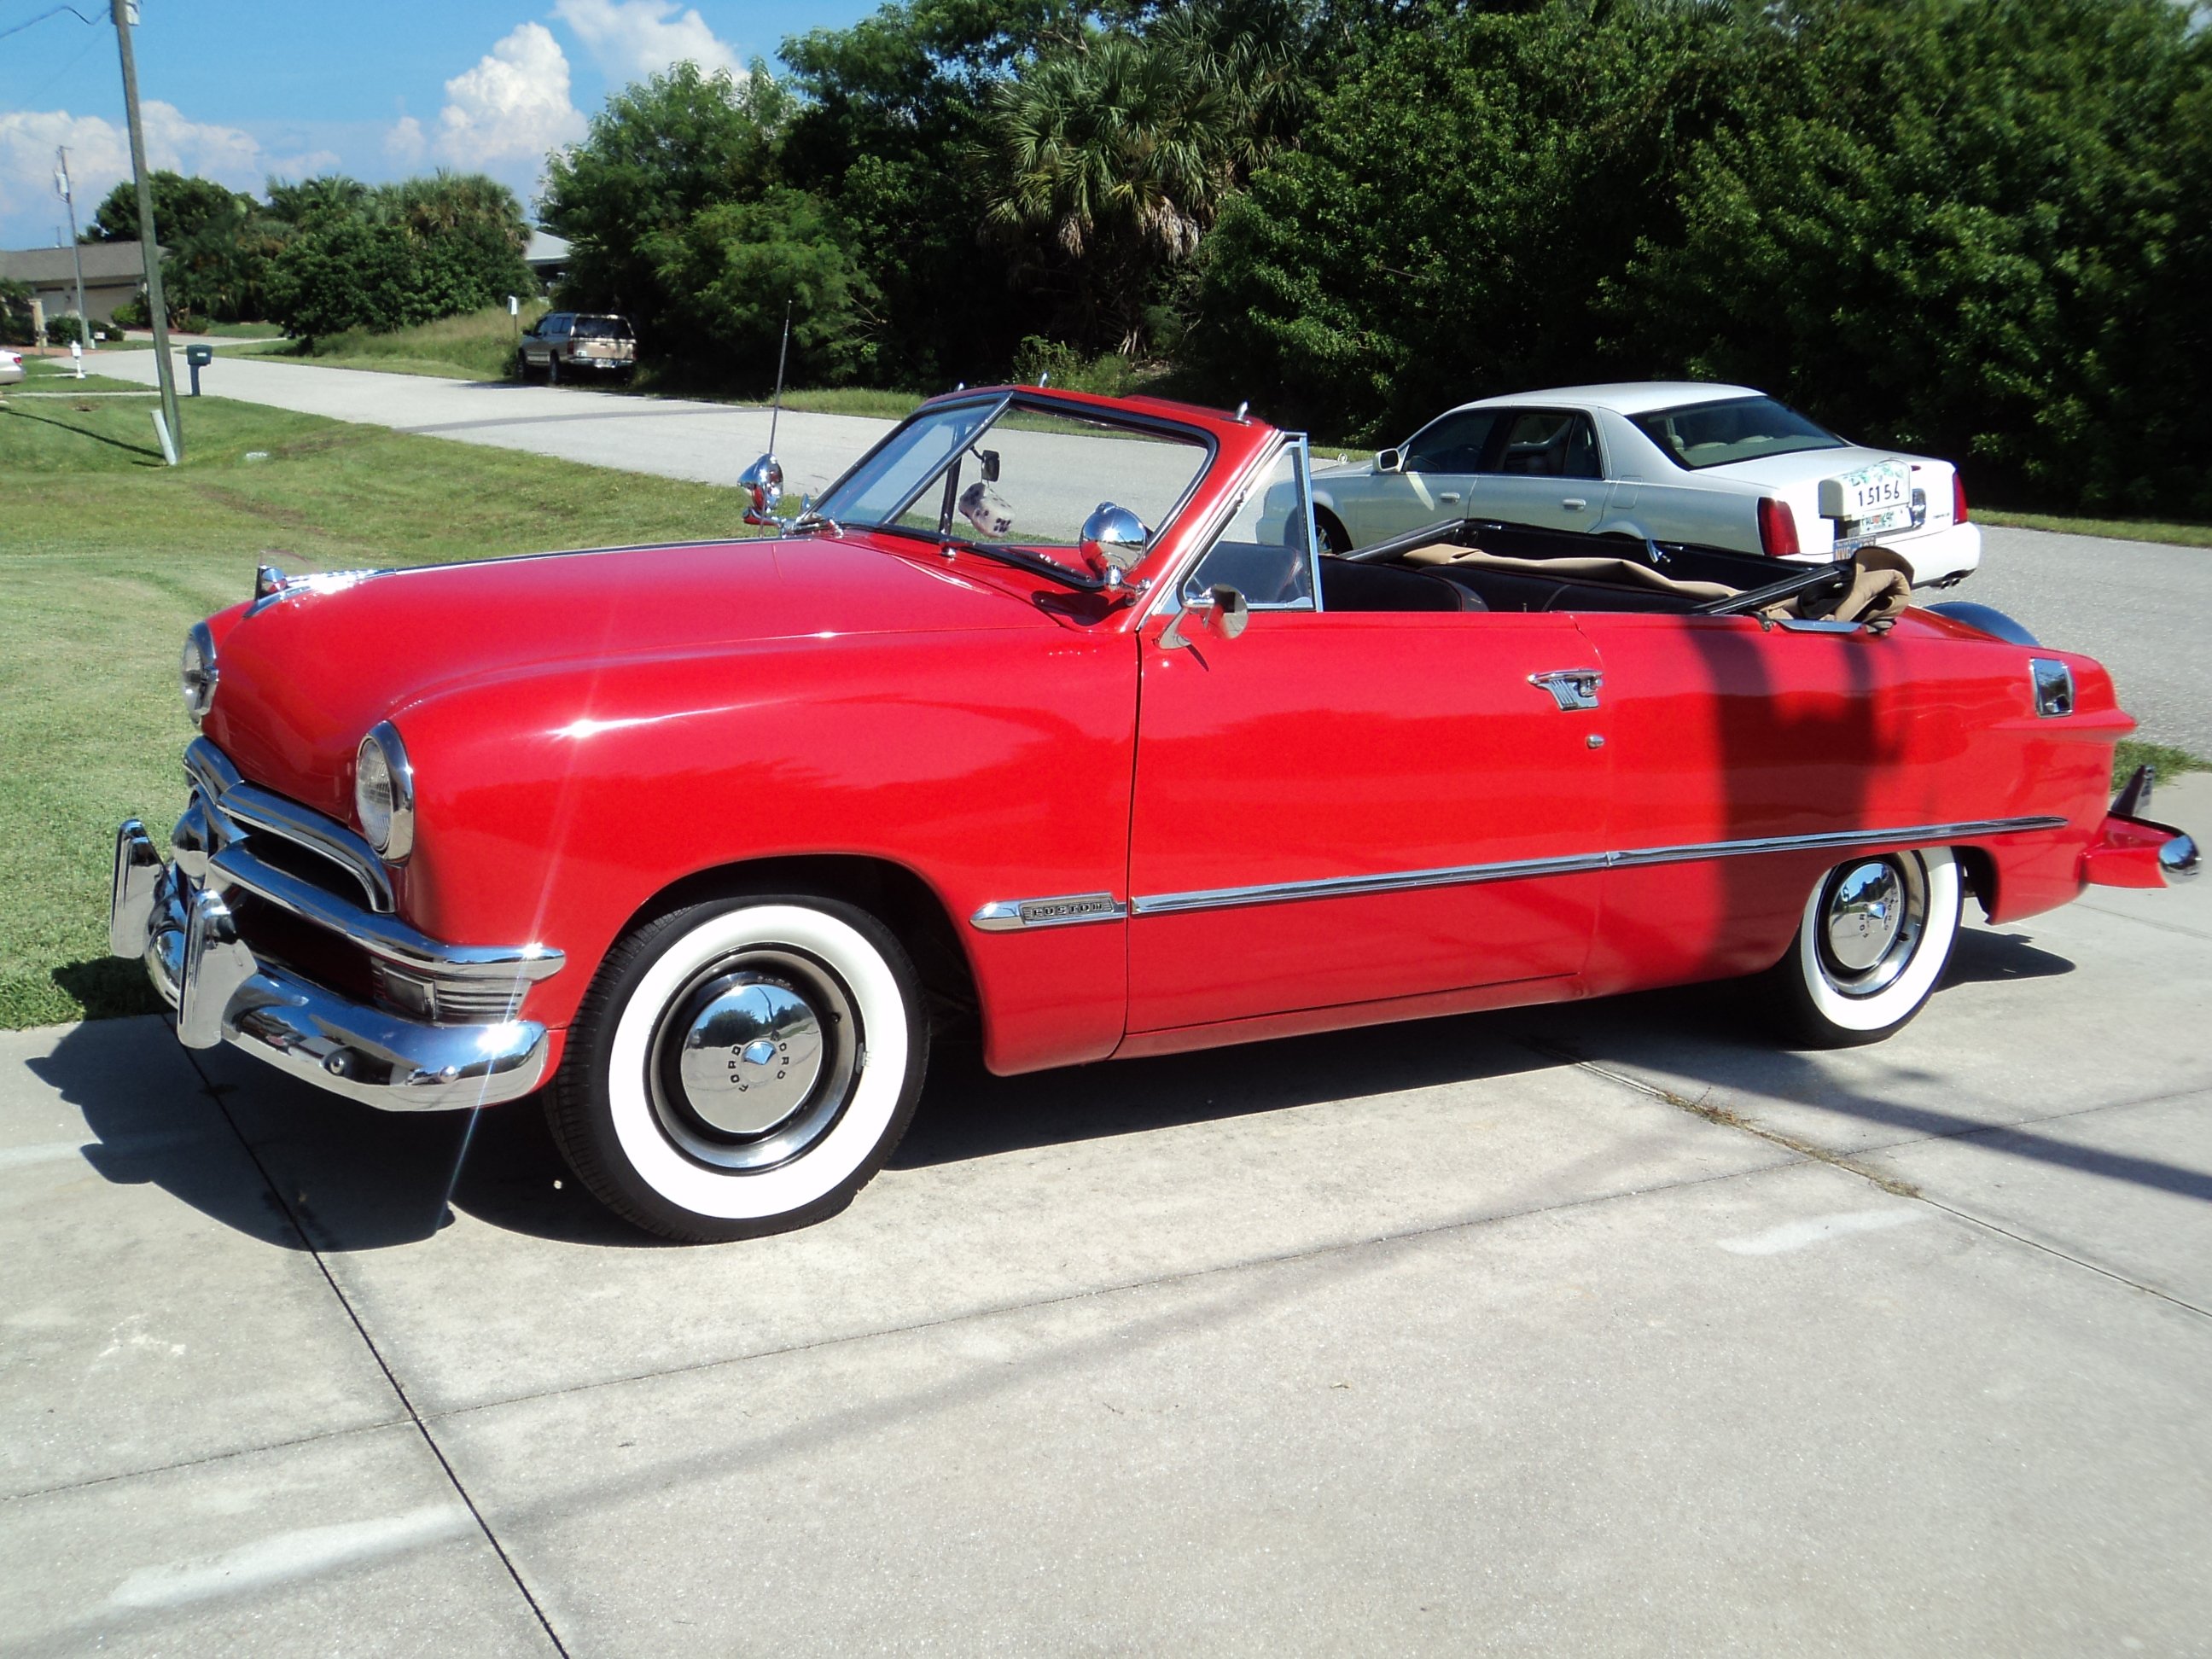 1950, Ford, Custonline, Deluxe, Convertible, Red, Classic, Old, Vintage, Original, Usa, 2592x1944 13 Wallpaper